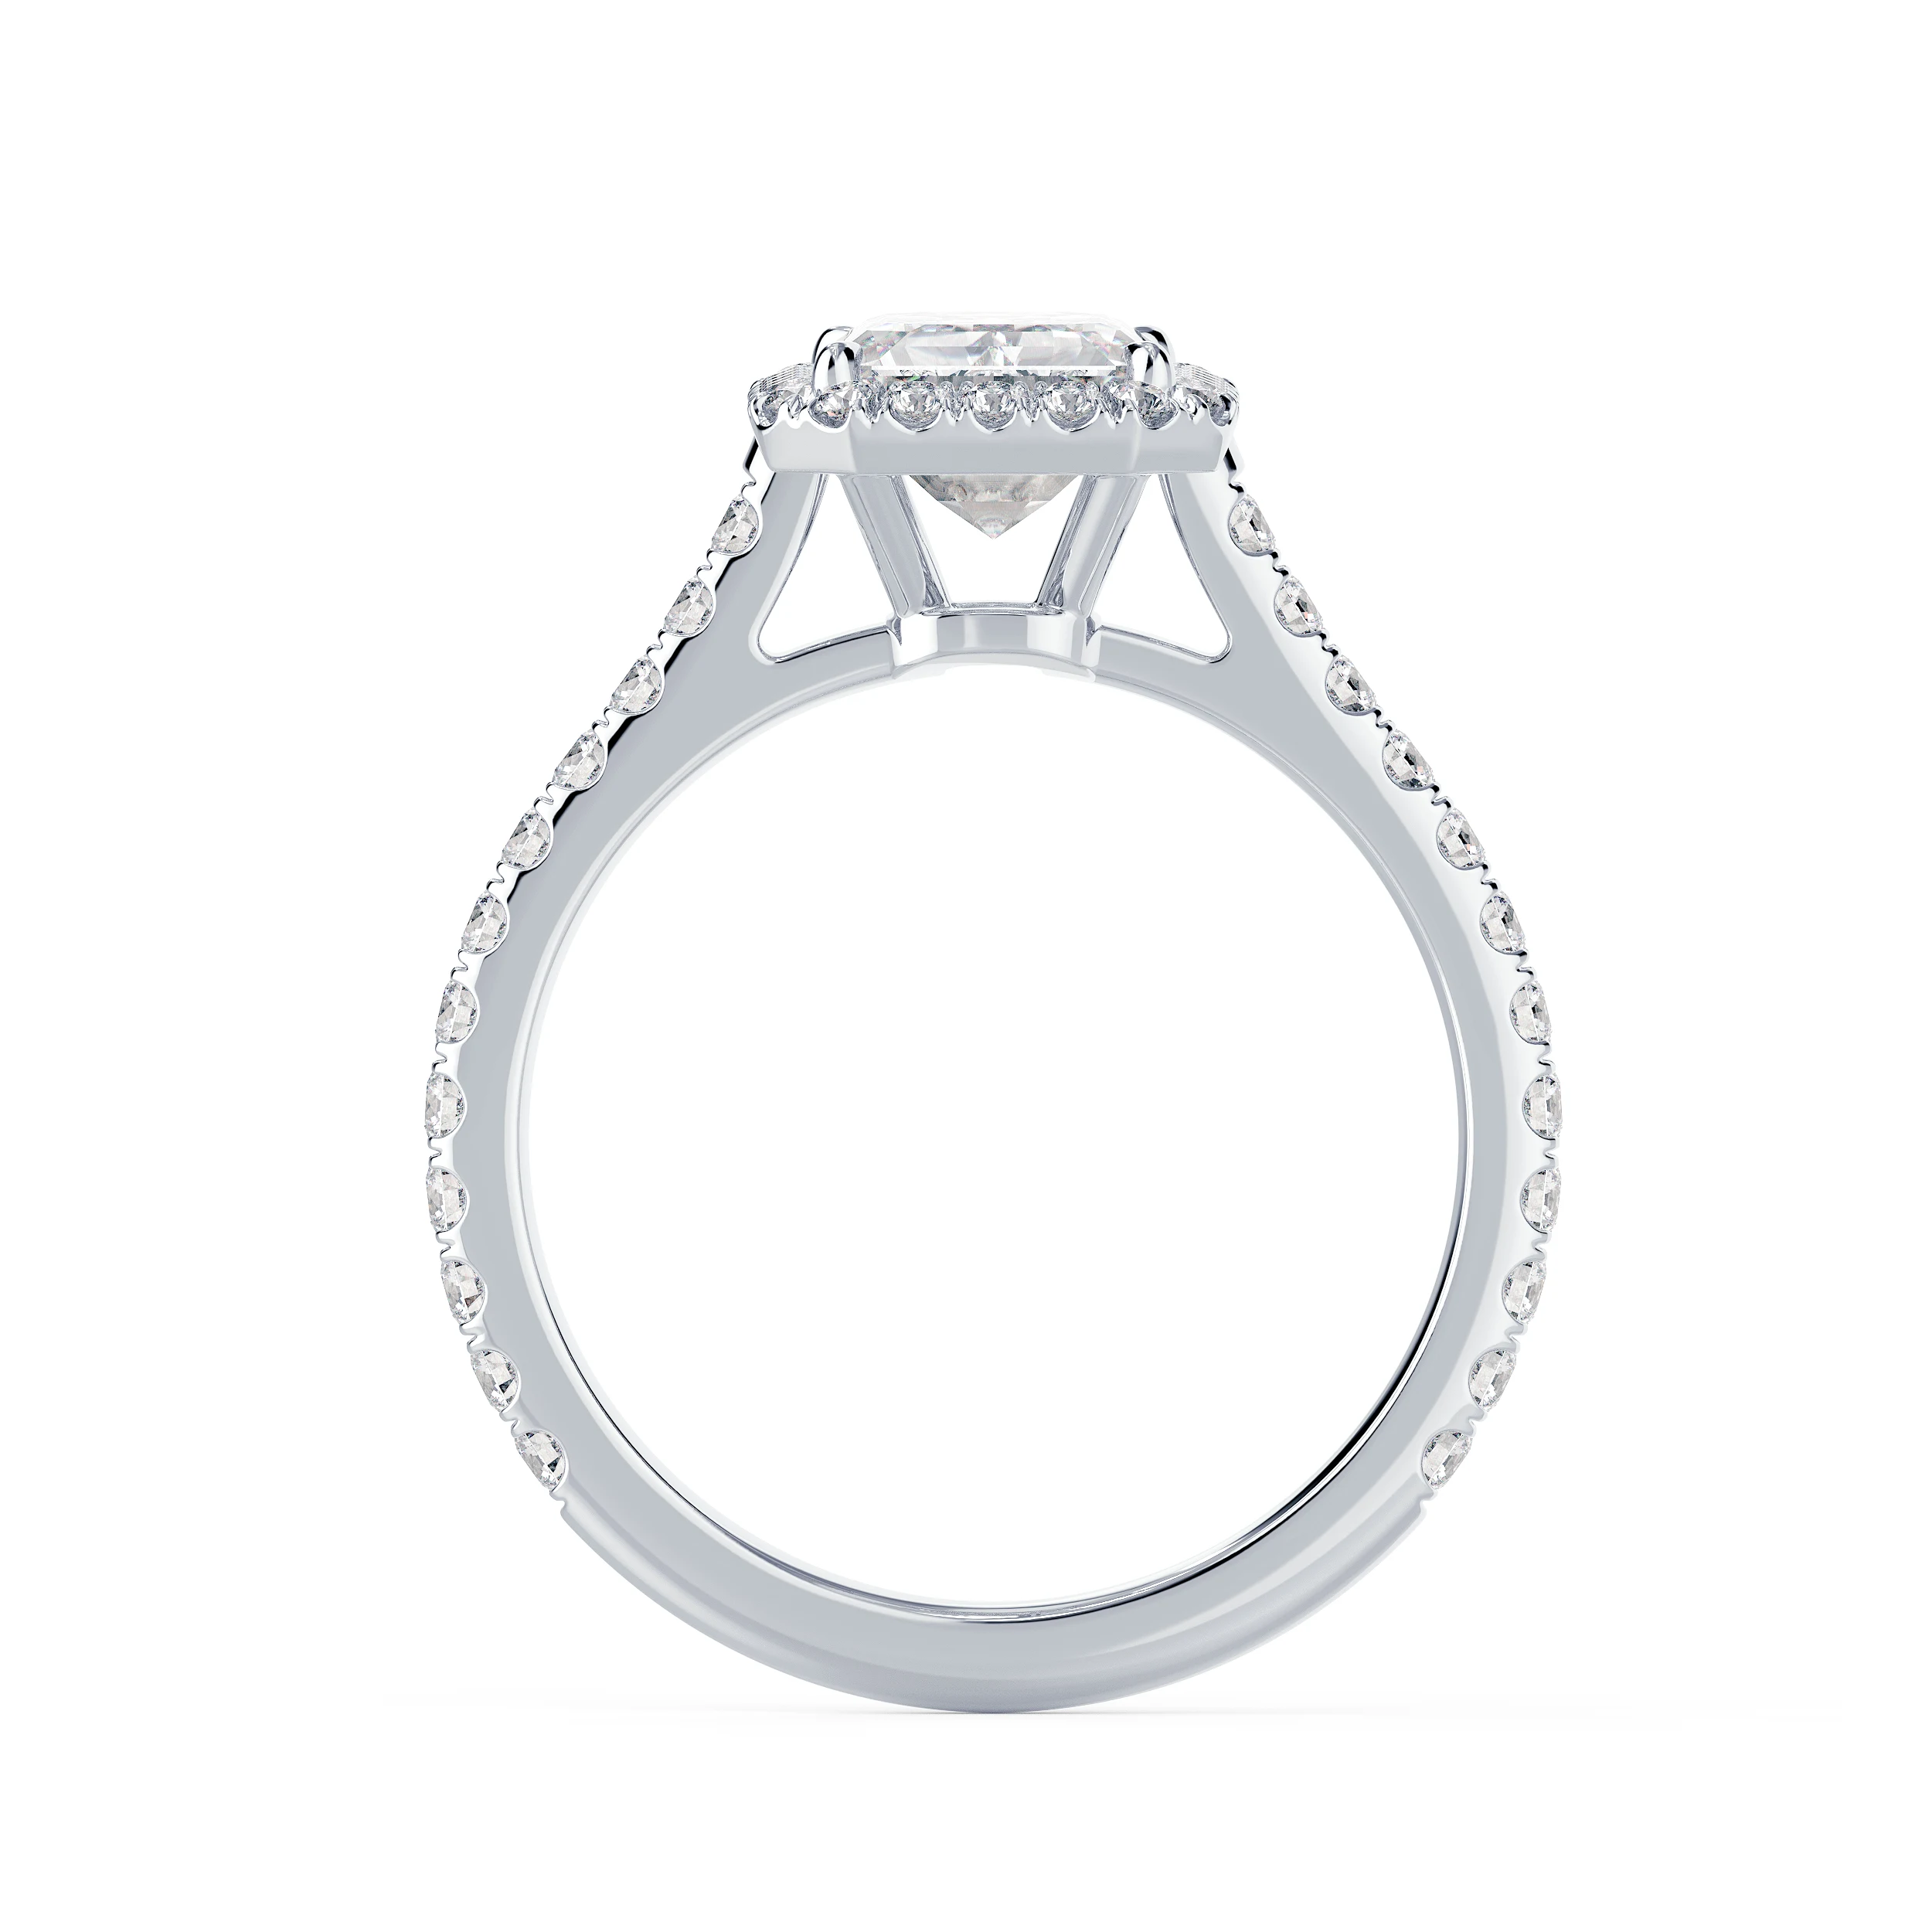 High Quality Synthetic Diamonds set in White Gold Emerald Halo Pavé Diamond Engagement Ring (Profile View)